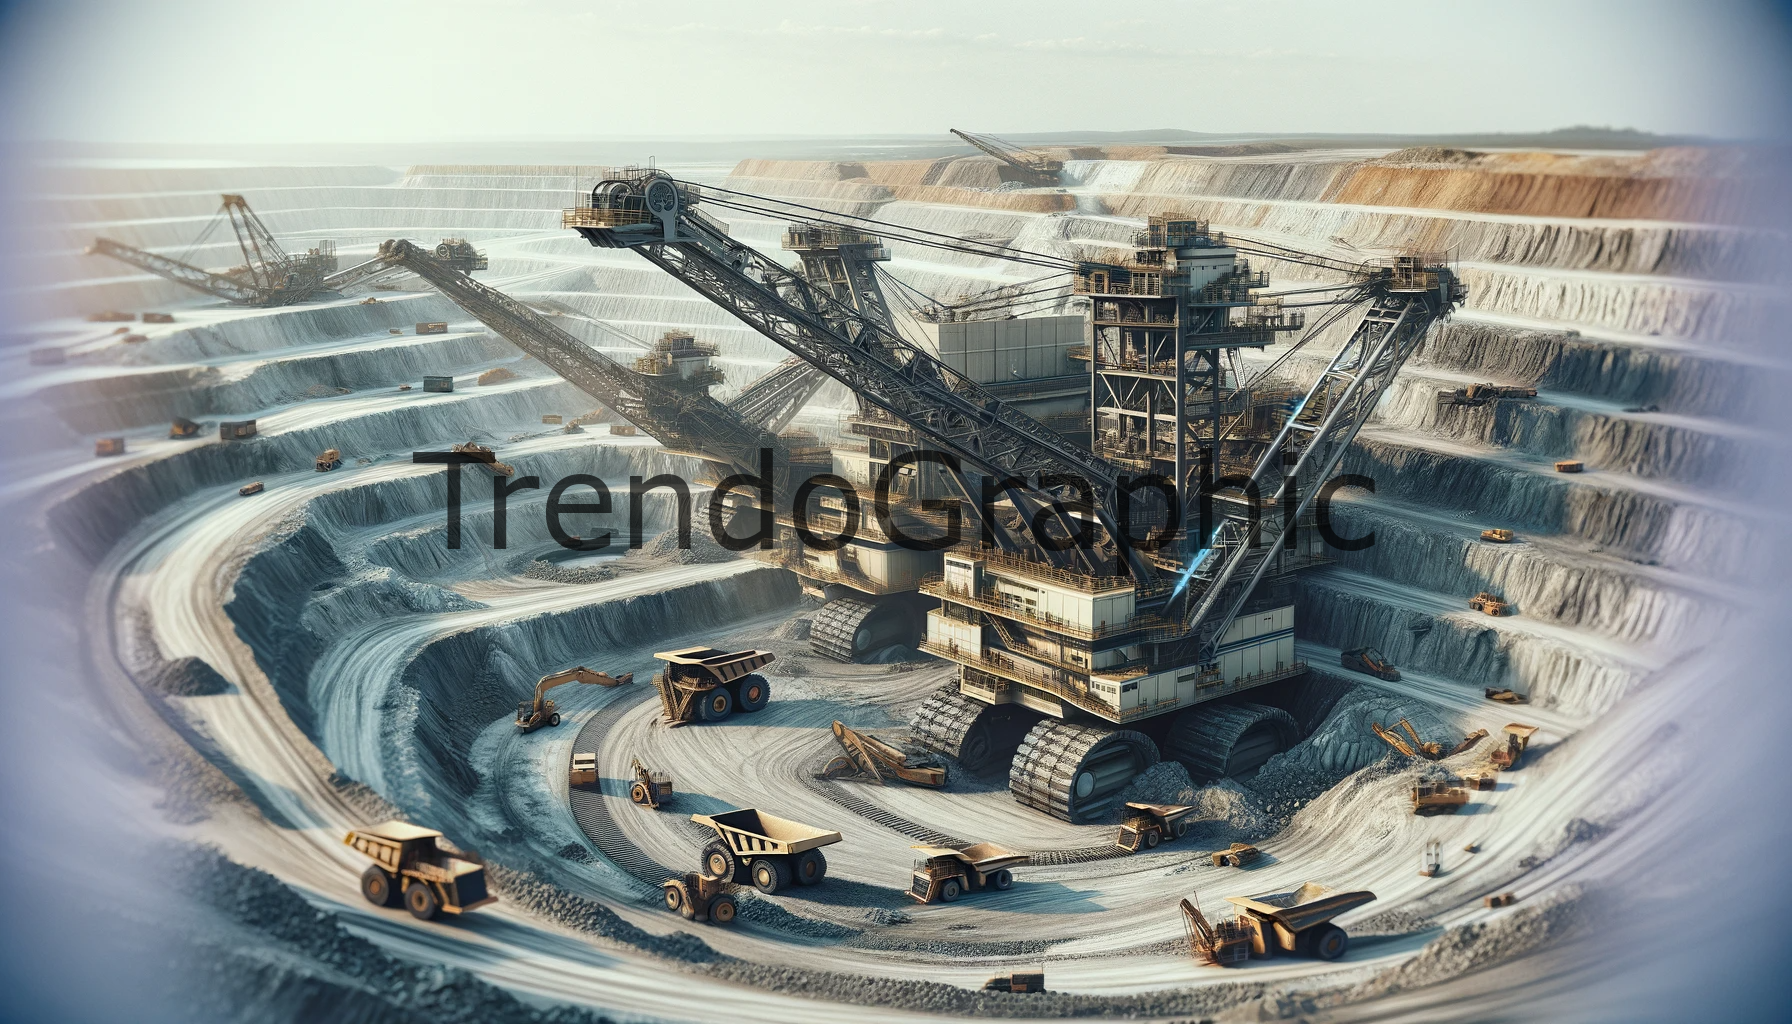 Industrial Giants: Modern Open-Pit Mining Spectacle